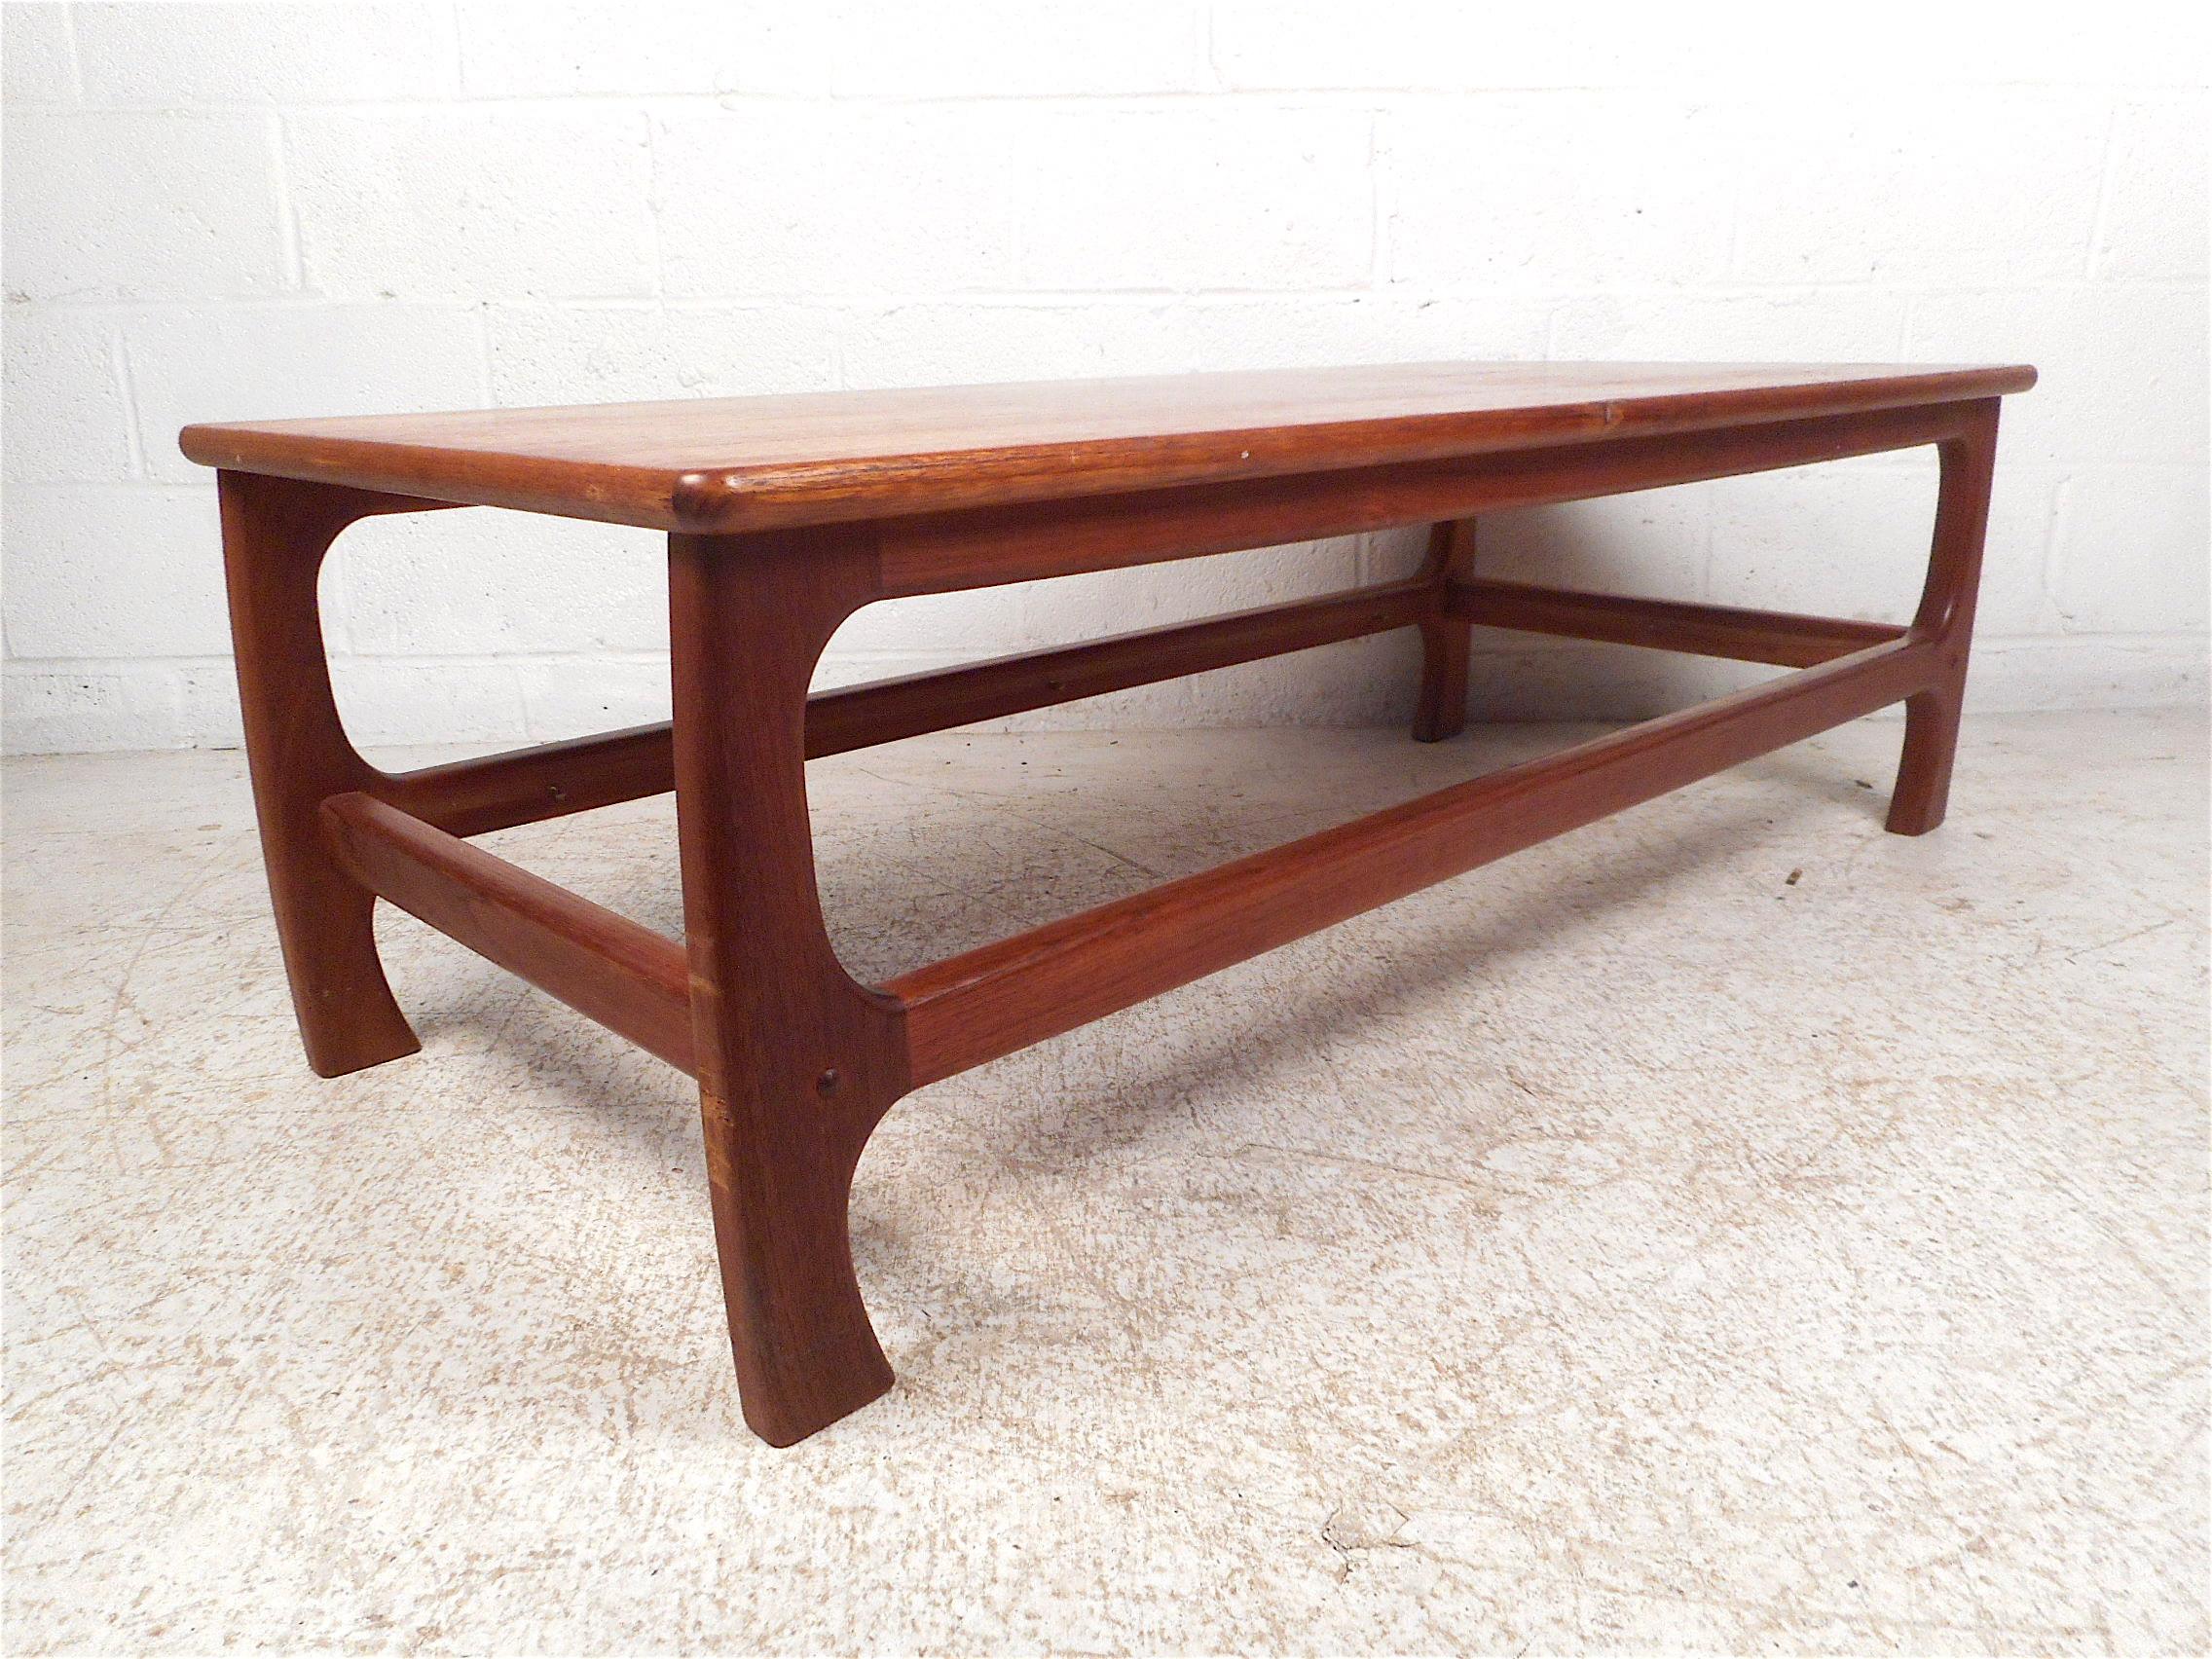 Stylish midcentury coffee table. Spacious table surface with interestingly contoured legs on the base. Great addition to any modern interior. Please confirm item location with dealer (NJ or NY).